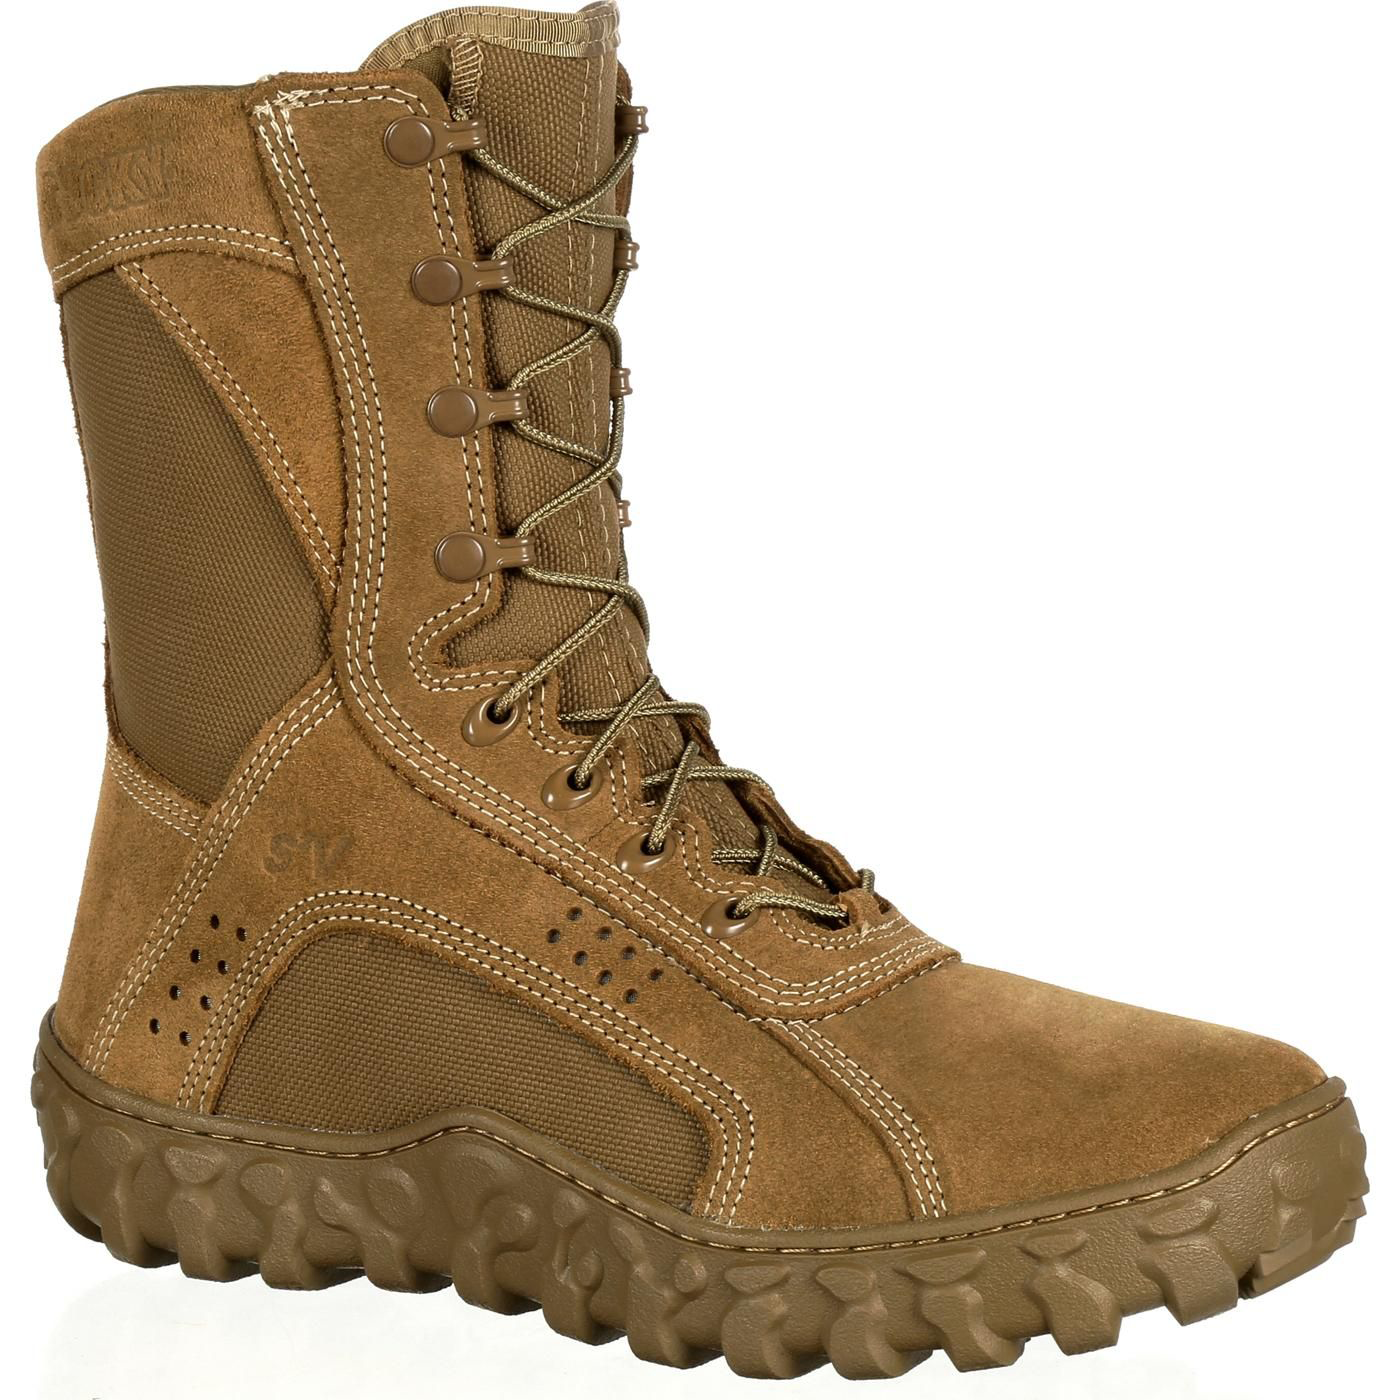 Rocky S2V Tactical Military Boots for Men - Coyote Brown - 12W